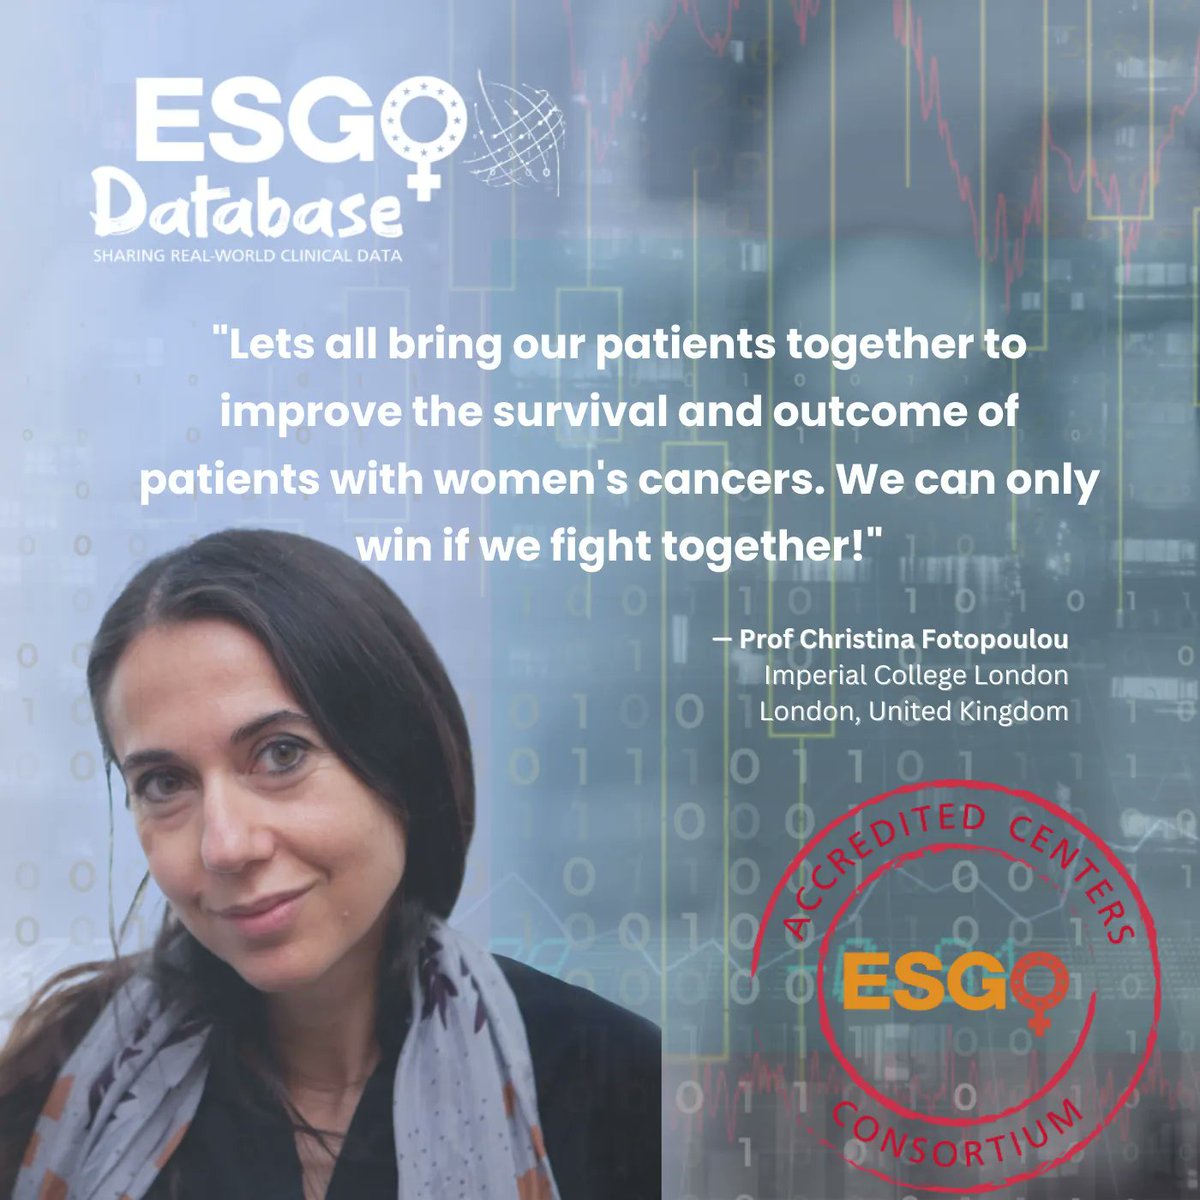 We are pleased to see so many fine centres joining the founding consortium and the #ESGODatabase! Thank you to Prof Christina Fotopoulou 🇬🇧 for her support of this pivotal project!

@CF_PC_OvCaGroup @agz_eriksson @cgmd33 @ENYGO_official